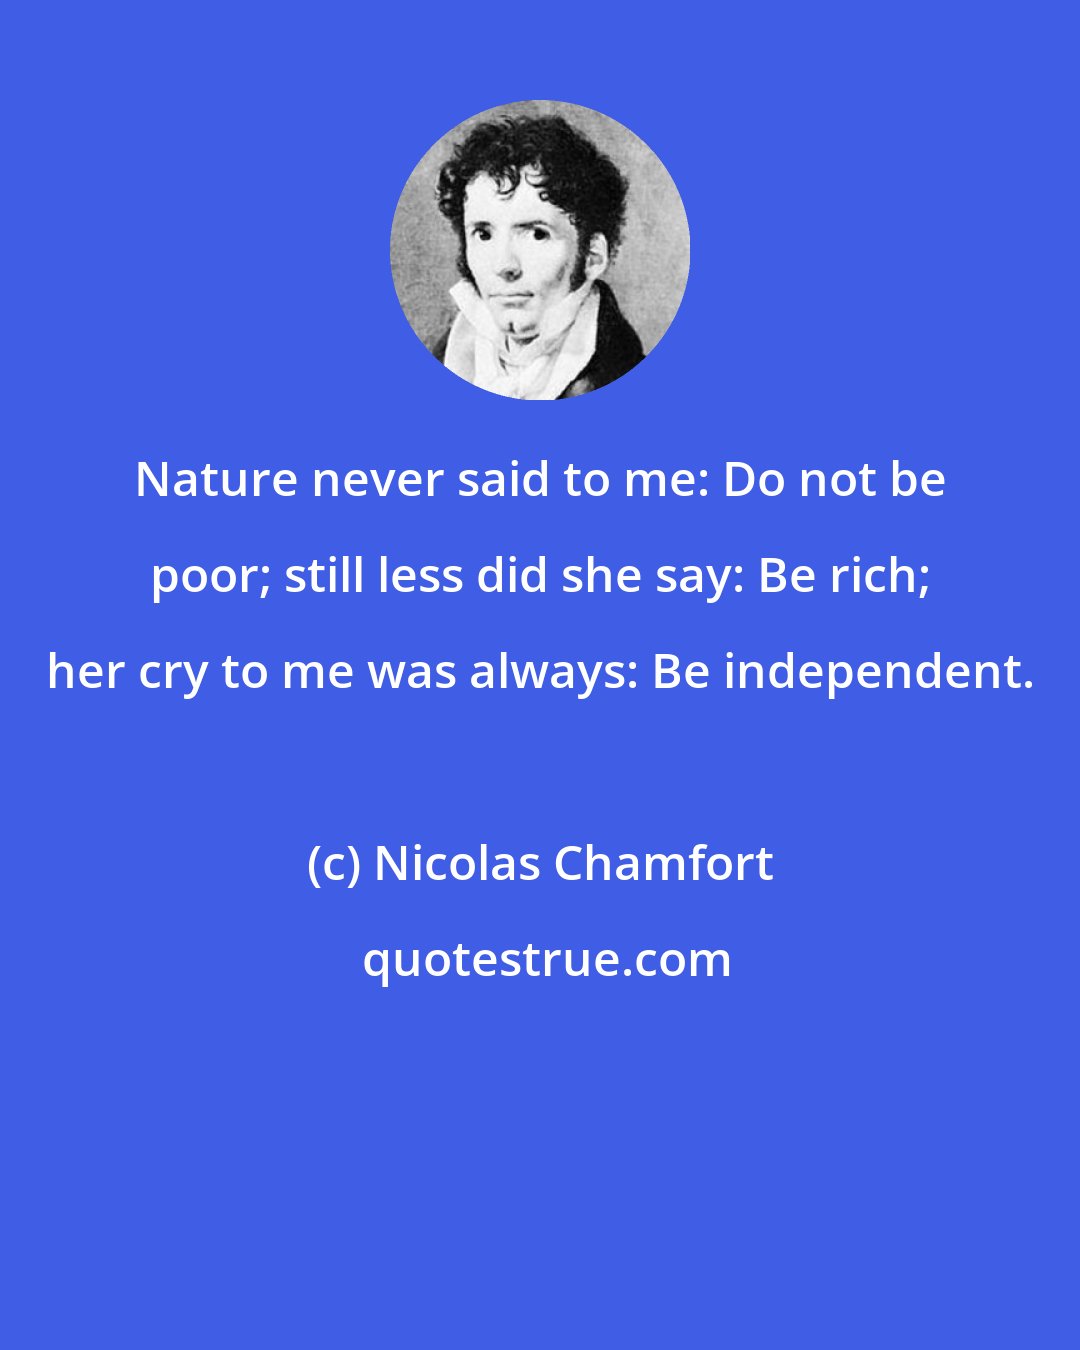 Nicolas Chamfort: Nature never said to me: Do not be poor; still less did she say: Be rich; her cry to me was always: Be independent.